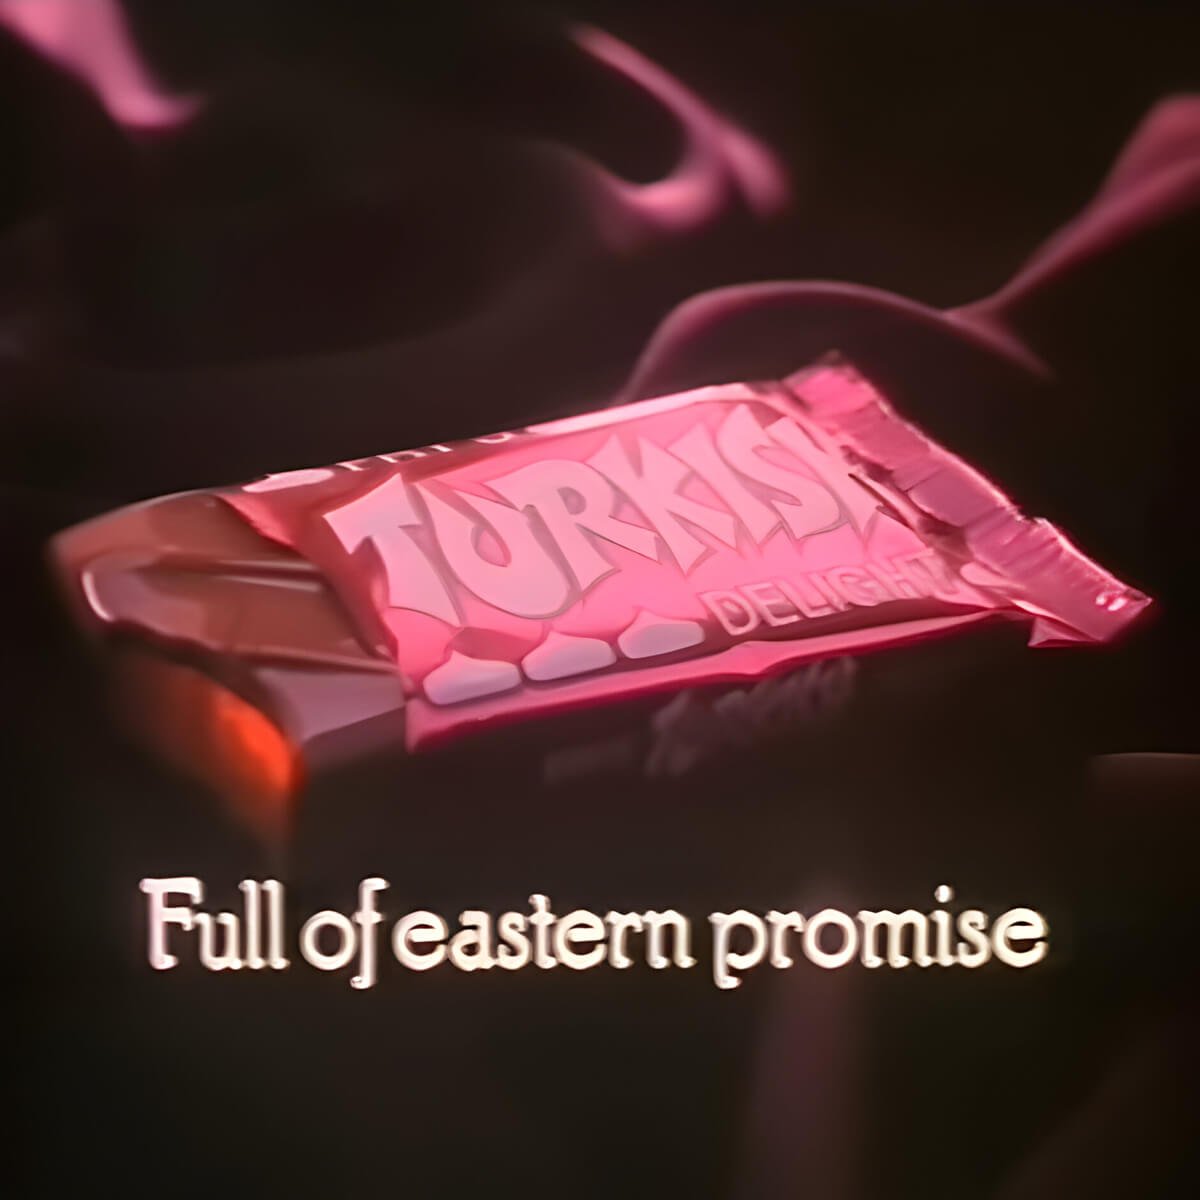 Fry's Turkish Delight advert from 1984 with Full of Eastern Promise slogan.